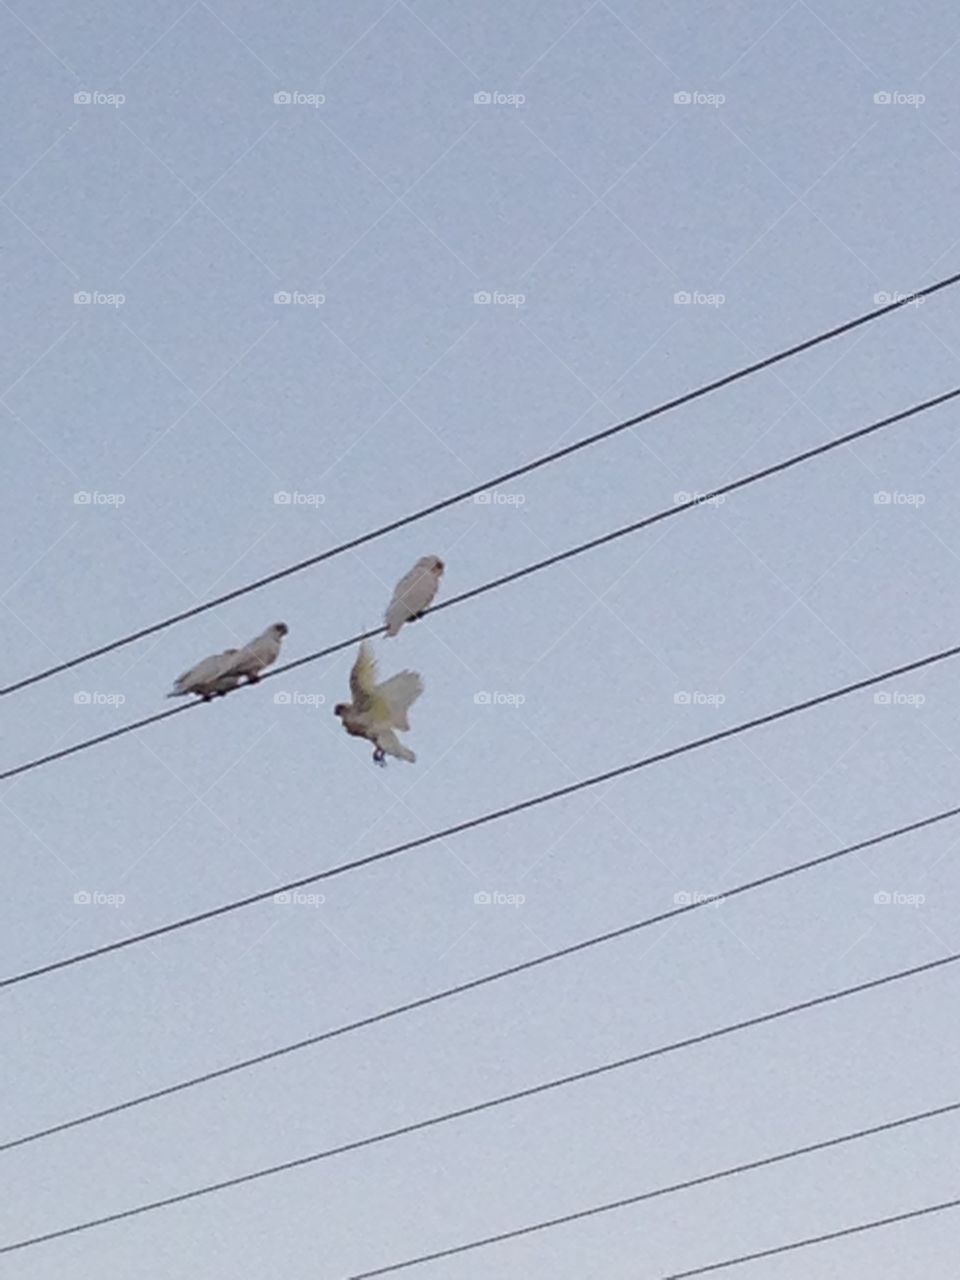 Birds on the electric line